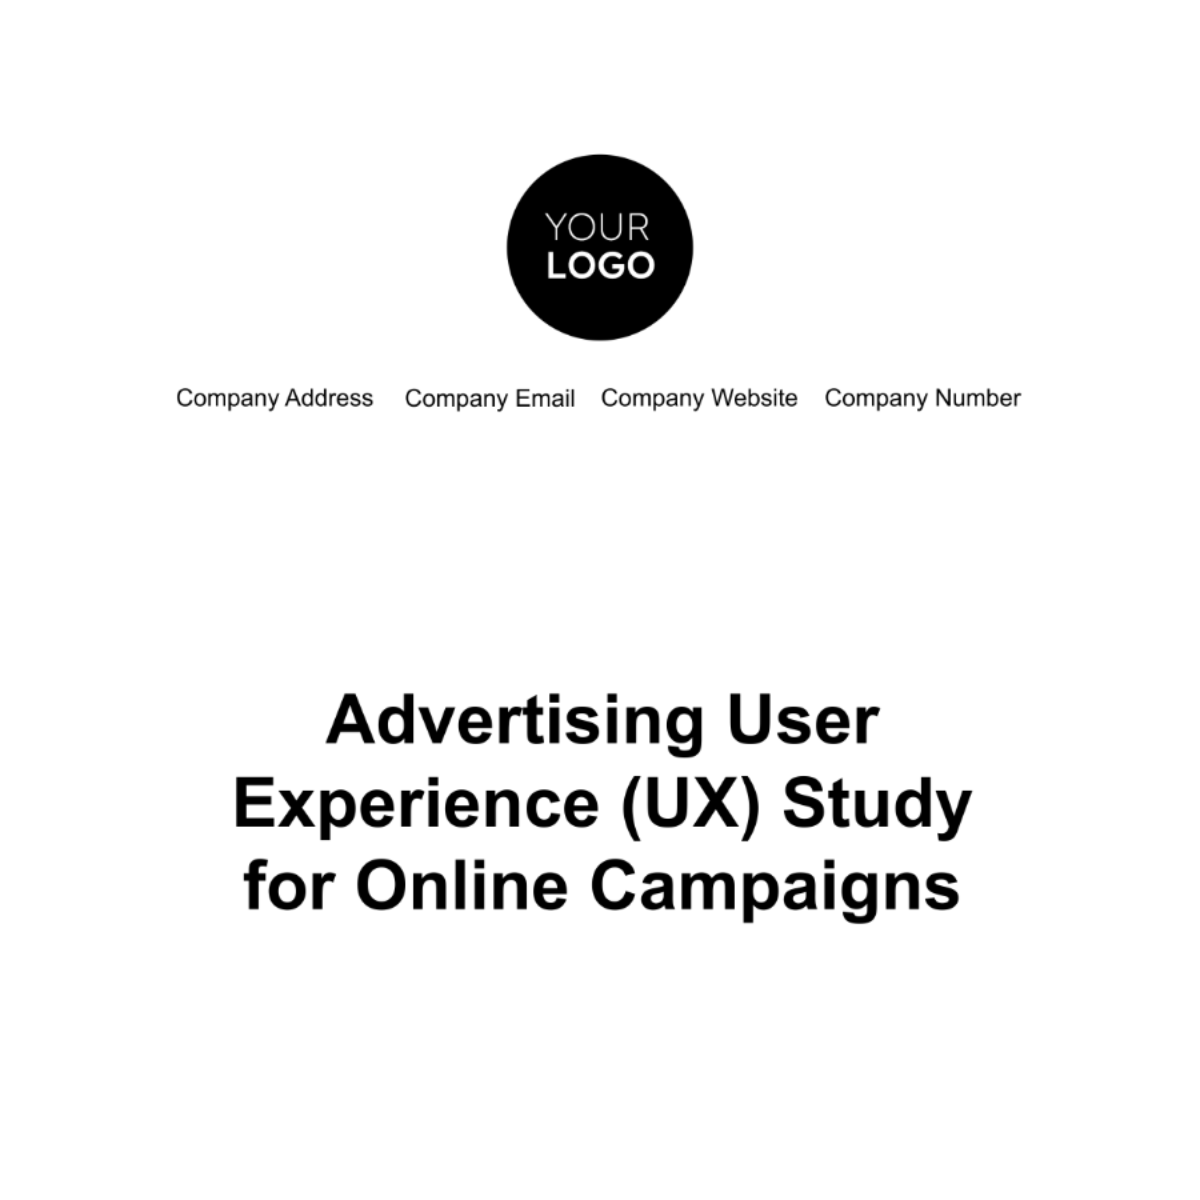 Advertising User Experience (UX) Study for Online Campaigns Template